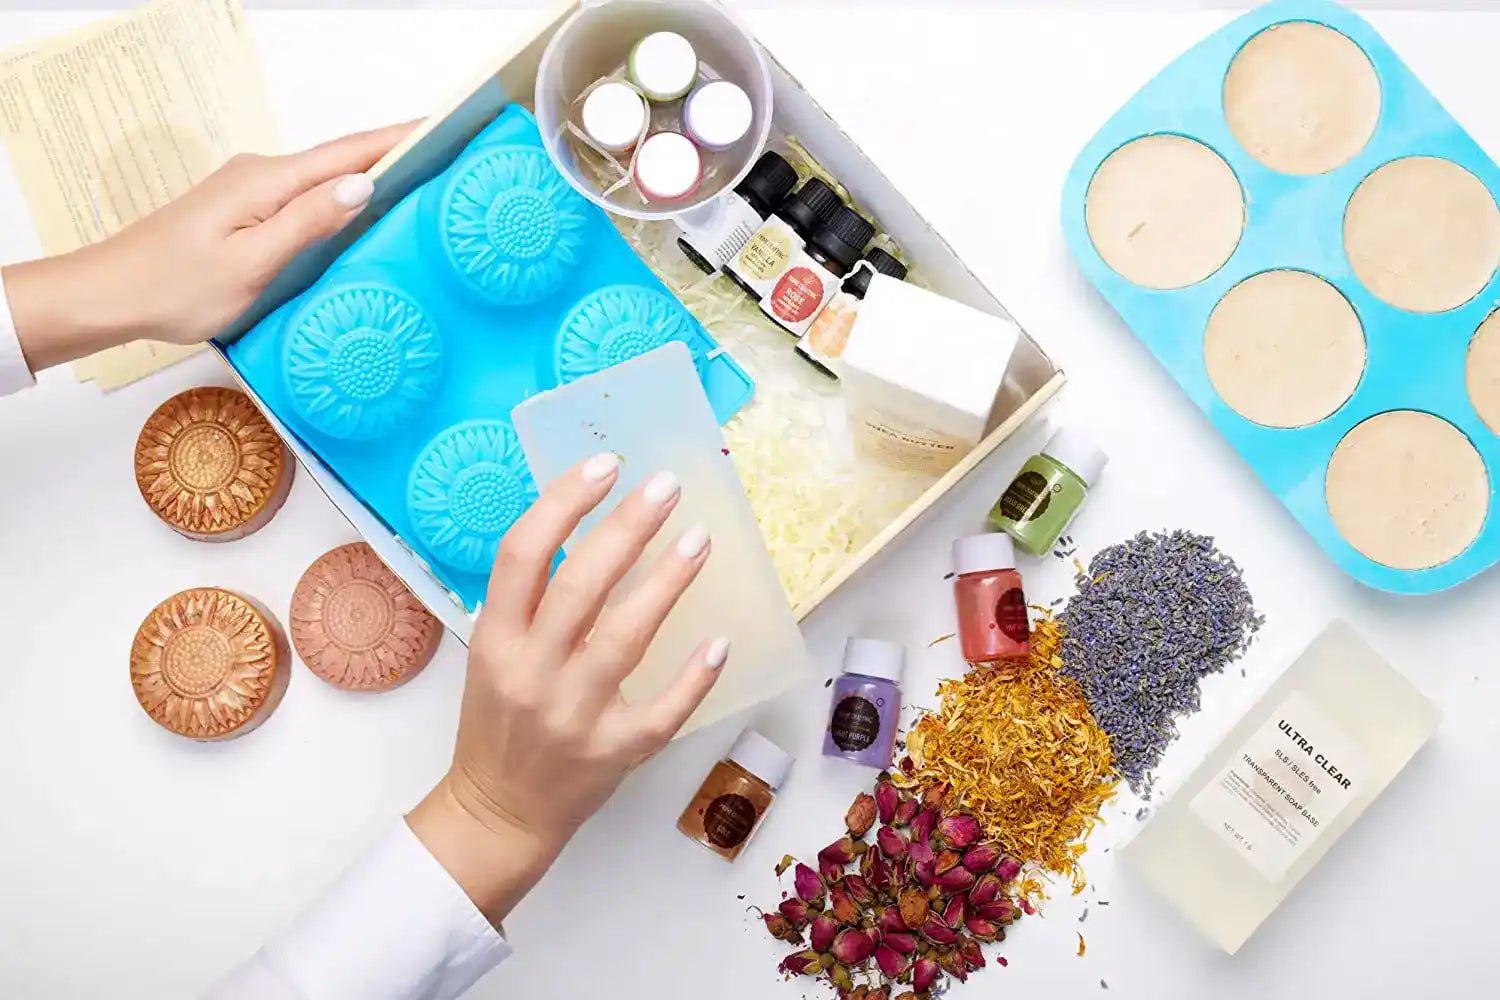 ALL-IN-ONE SOAP MAKING KIT